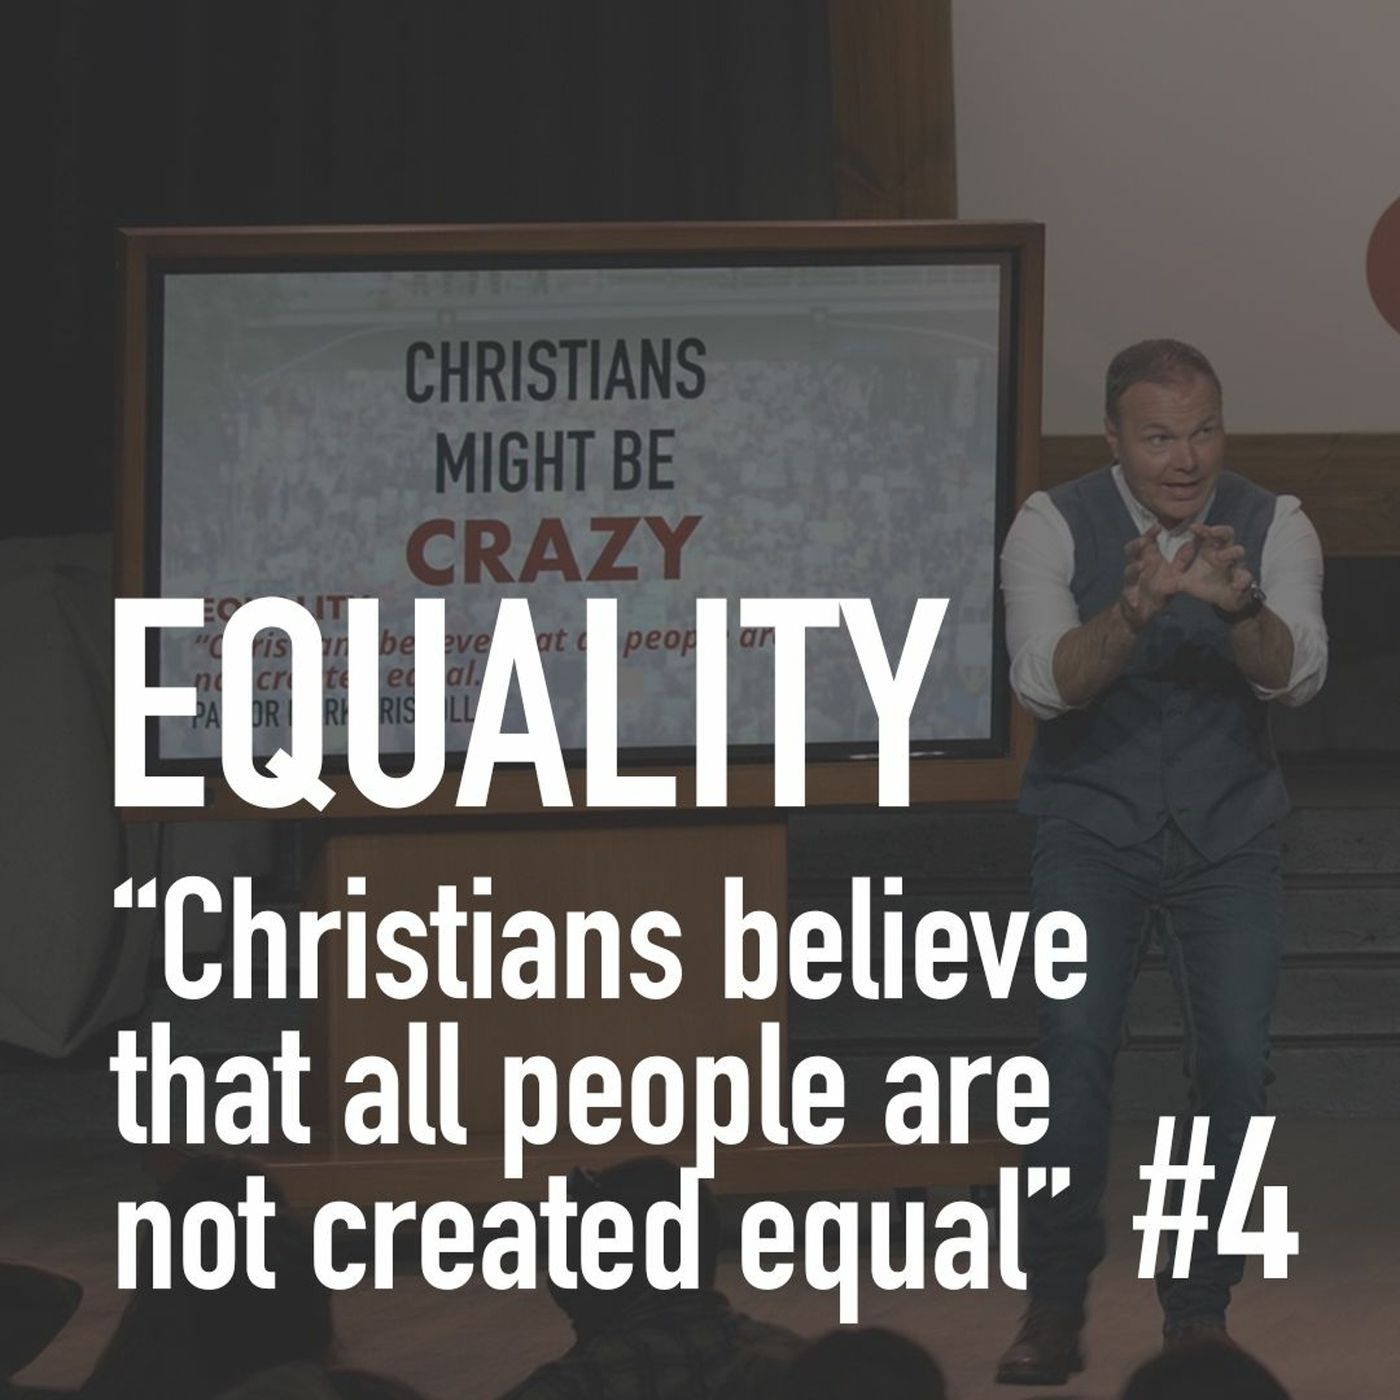 Christians Might Be Crazy #4 - Equality